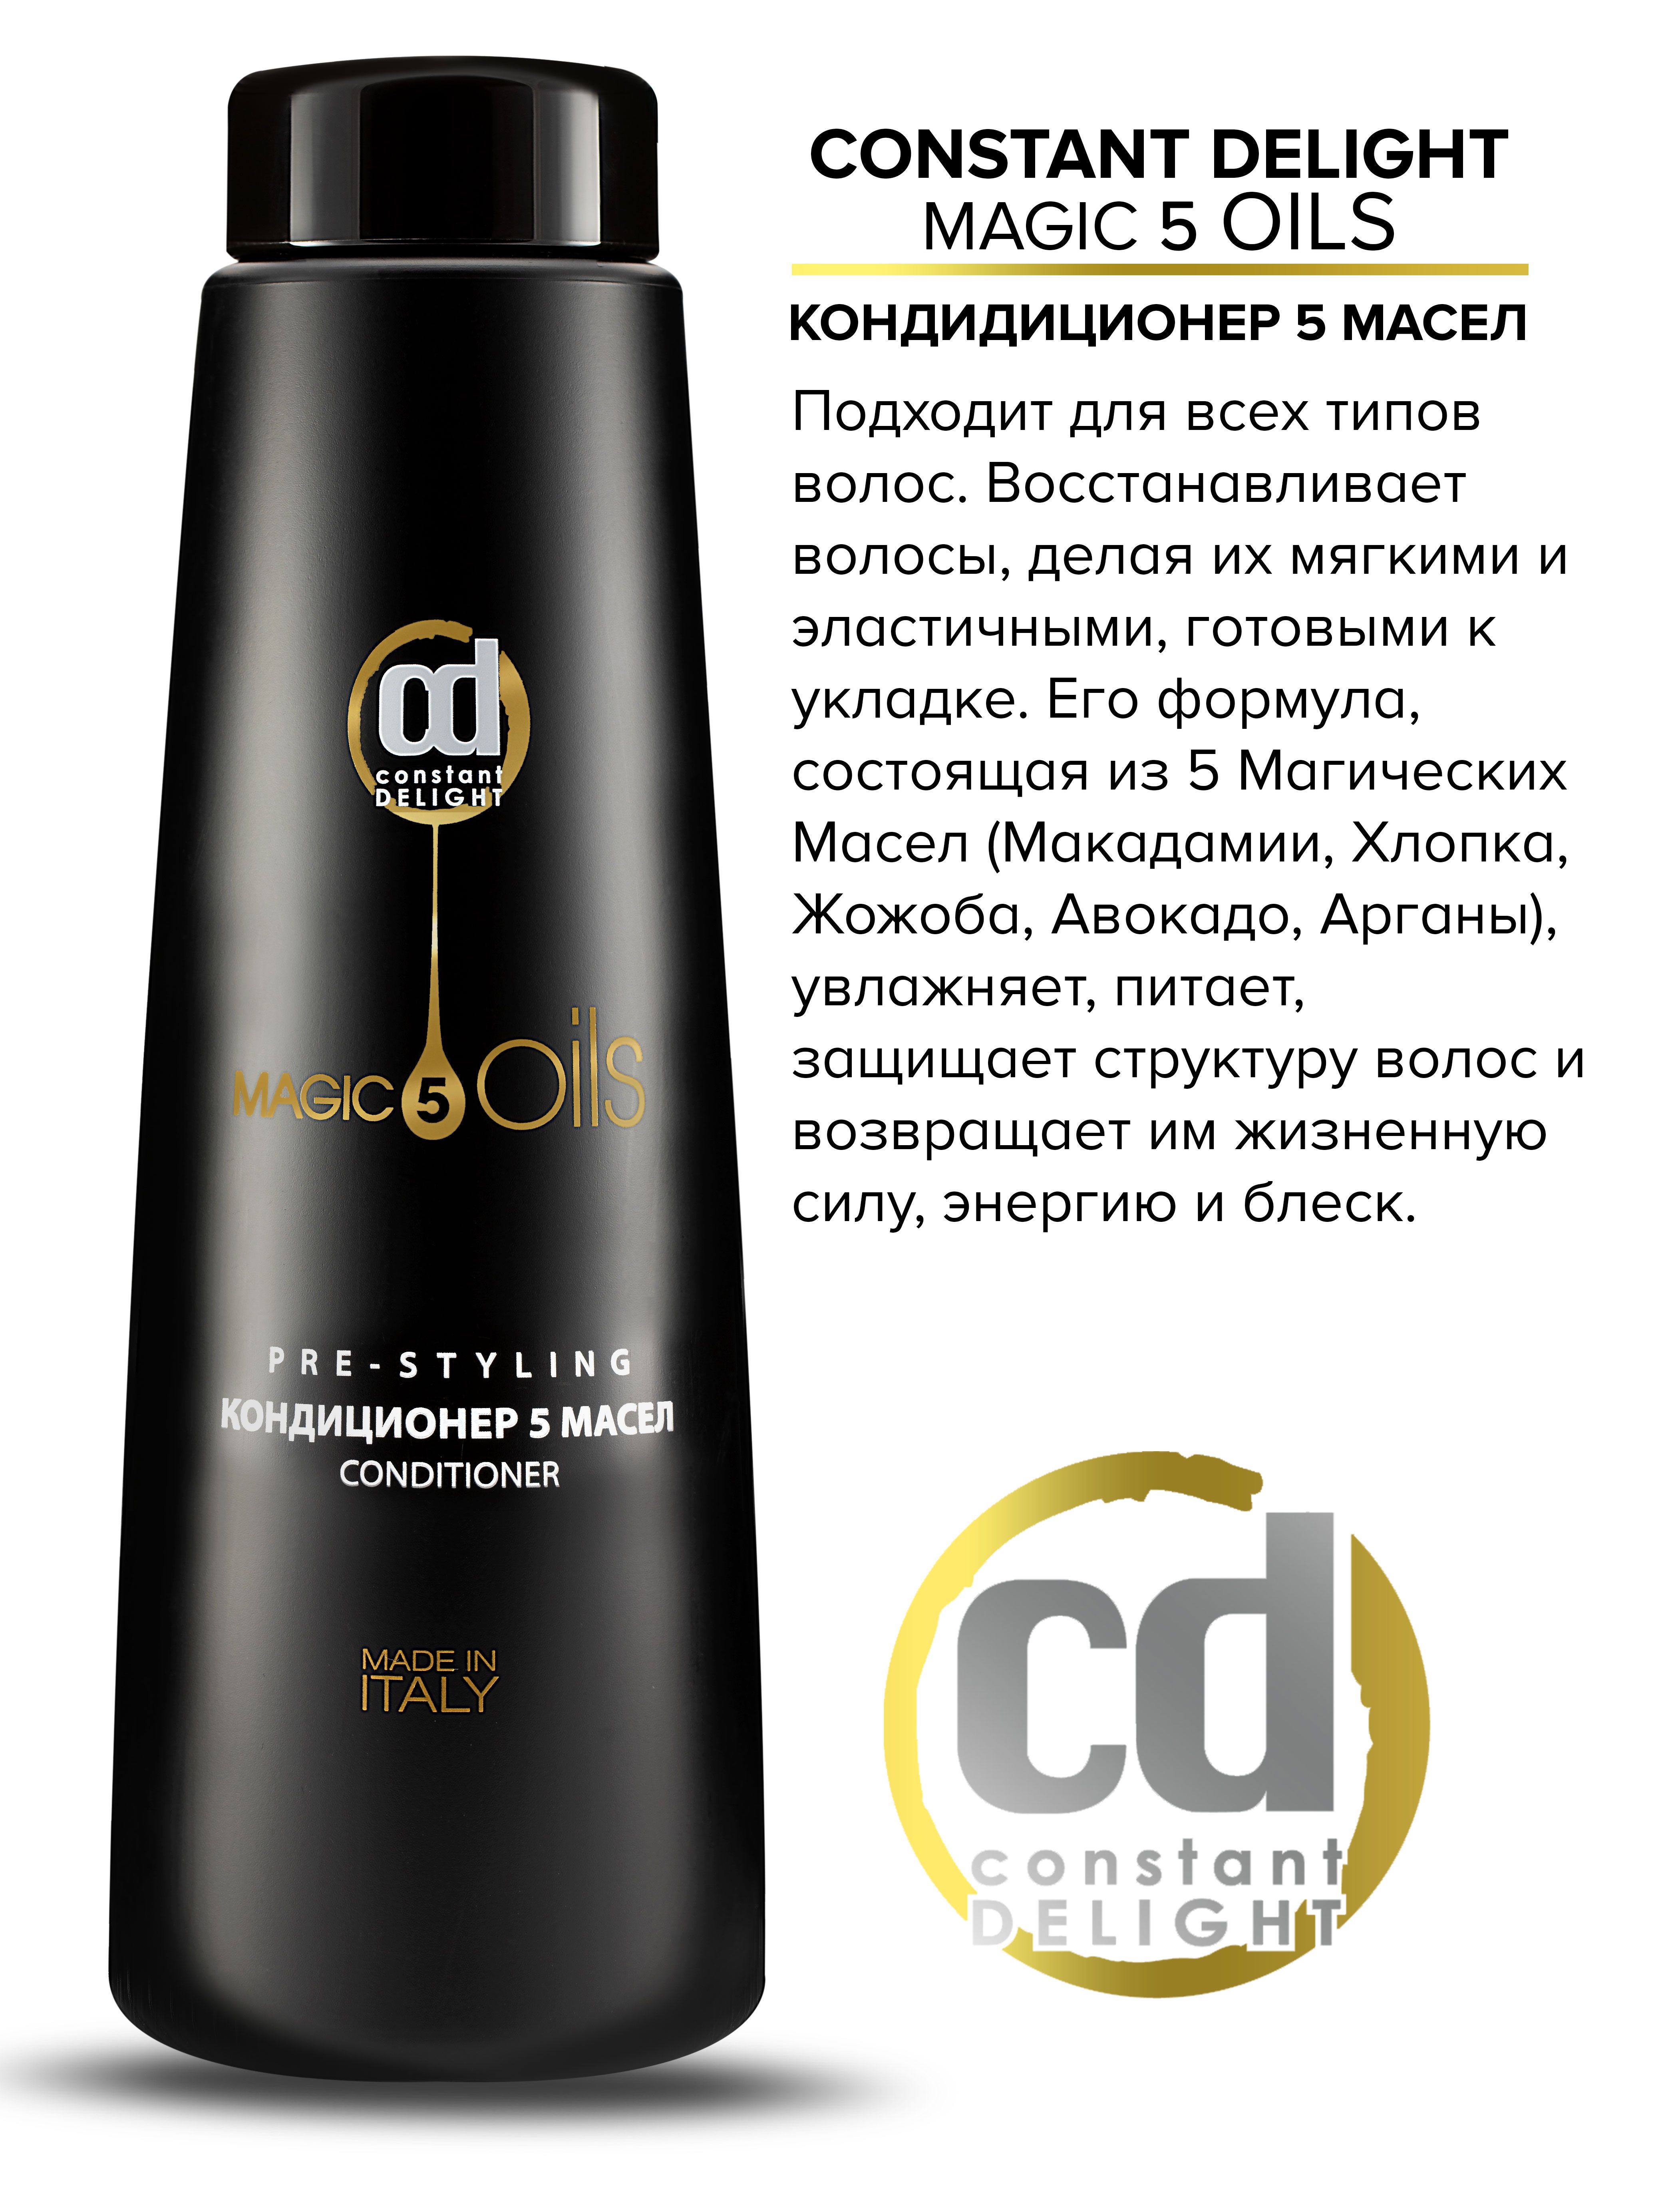 Бальзам 5 масел. Констант Делайт Magic Oils. 5 Масел constant Delight. Масло 5 масел Констант Делайт. Констант Делайт бальзам 5 масел.